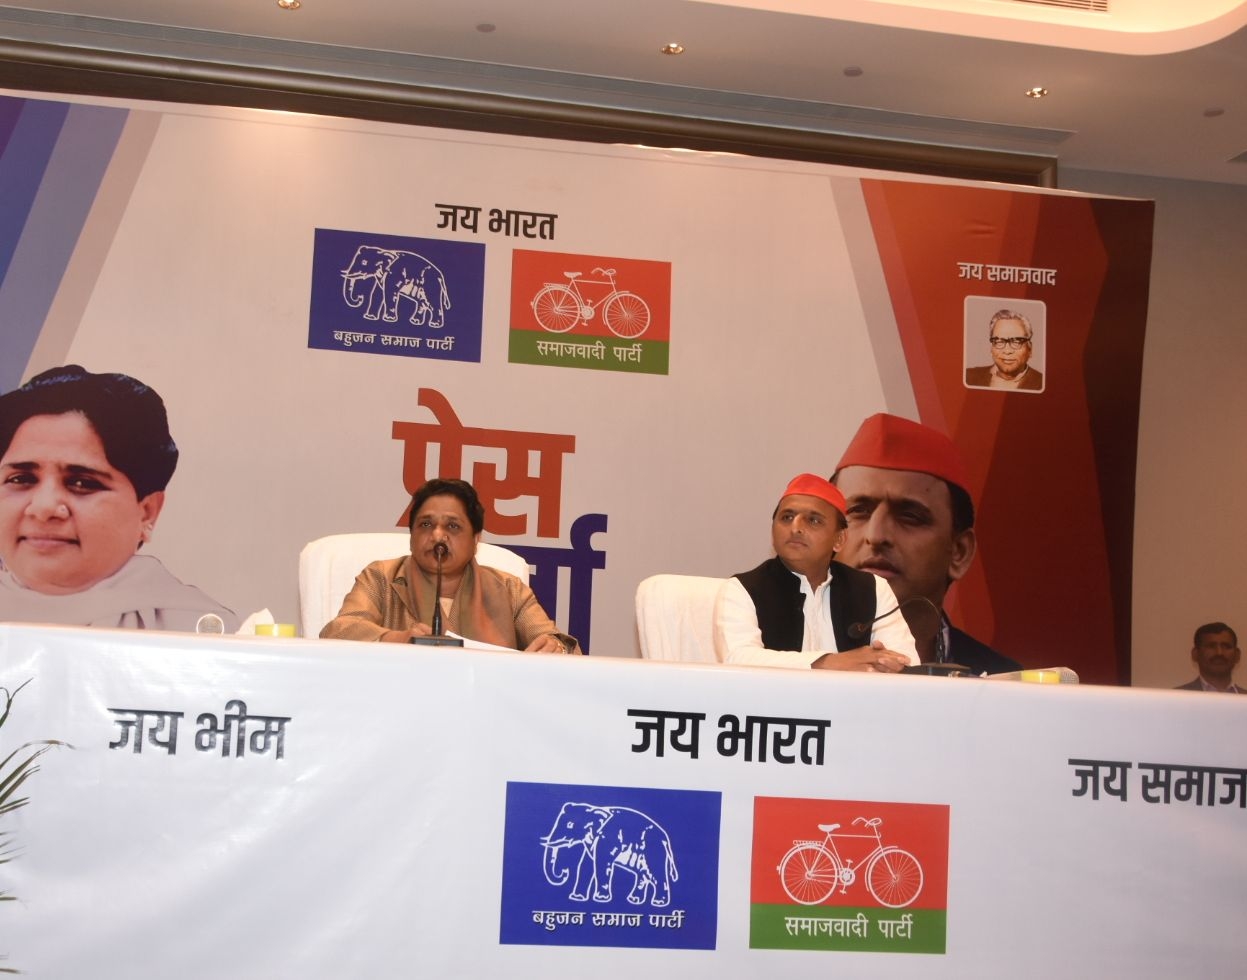 Arch-rivals SP-BSP alliance to contest 38 seats each in election 2019